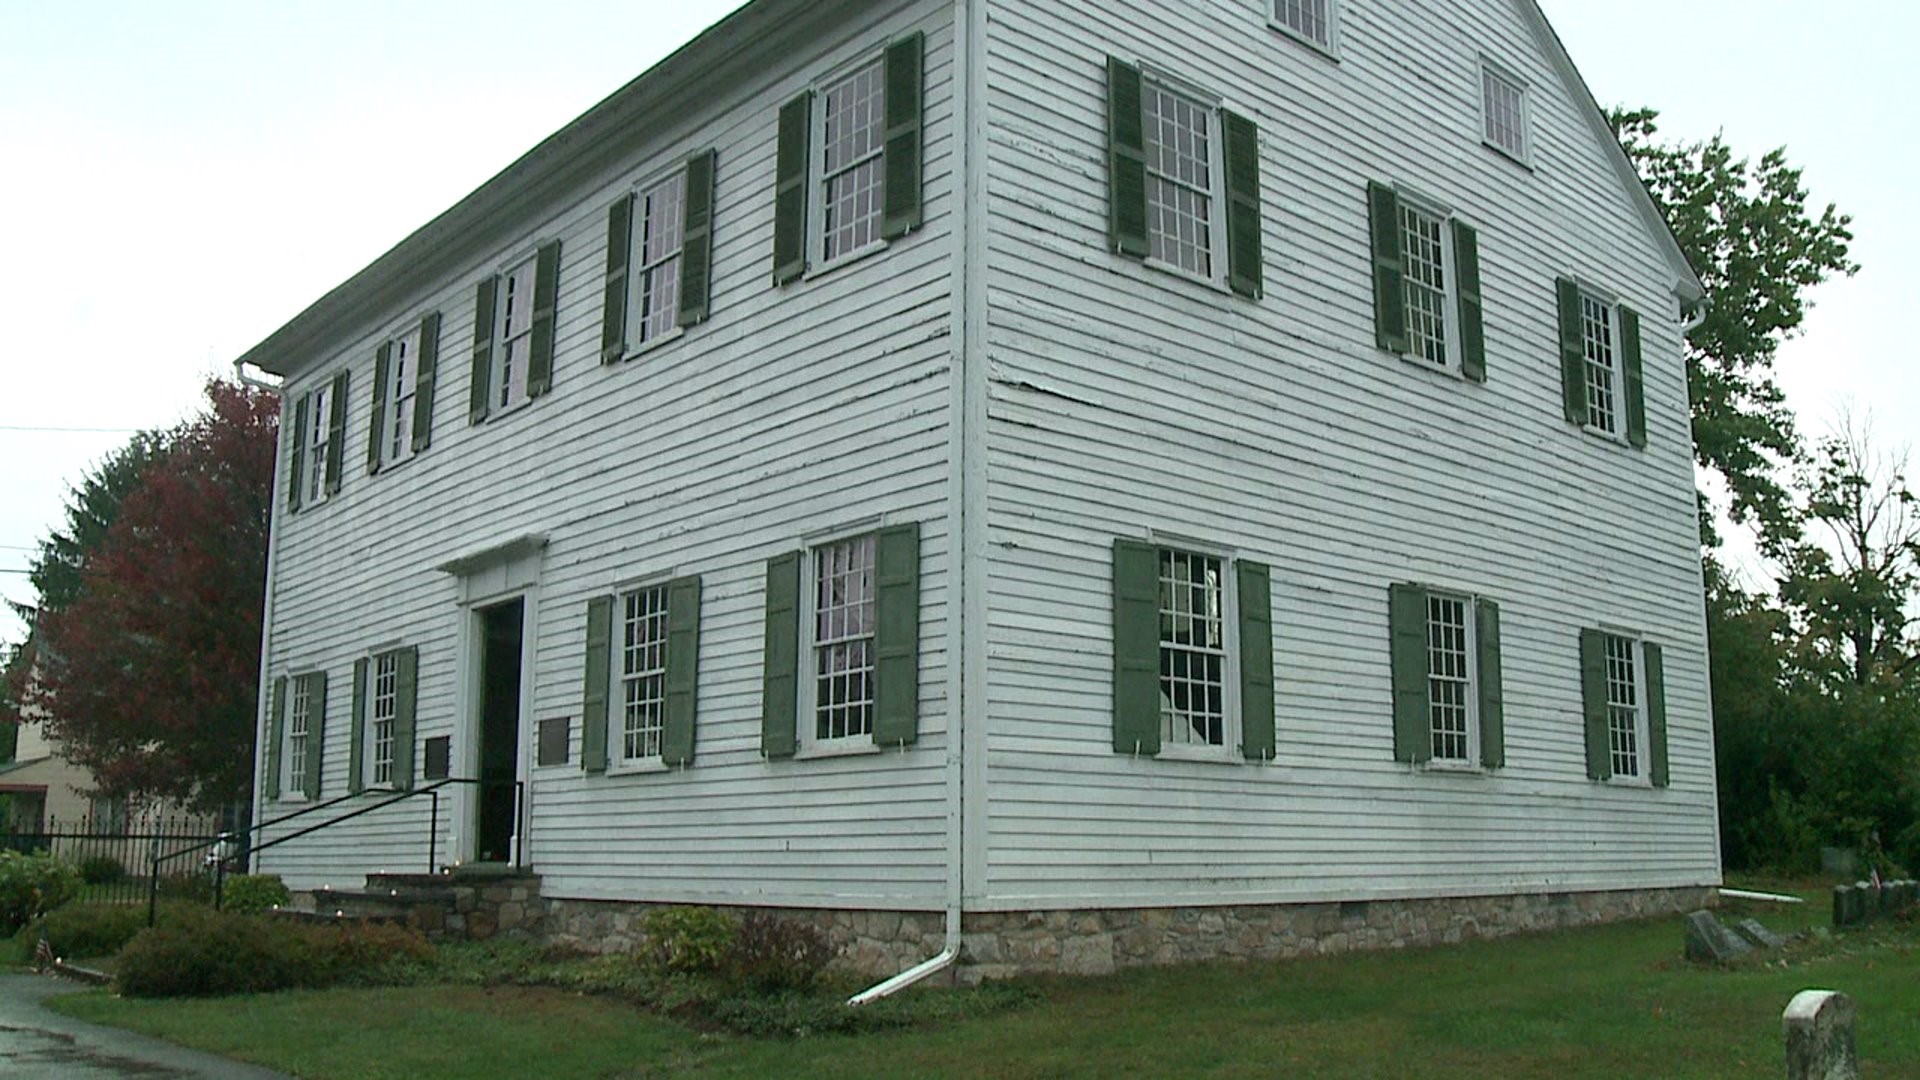 Keeping History Alive at 200-year-old Meeting House